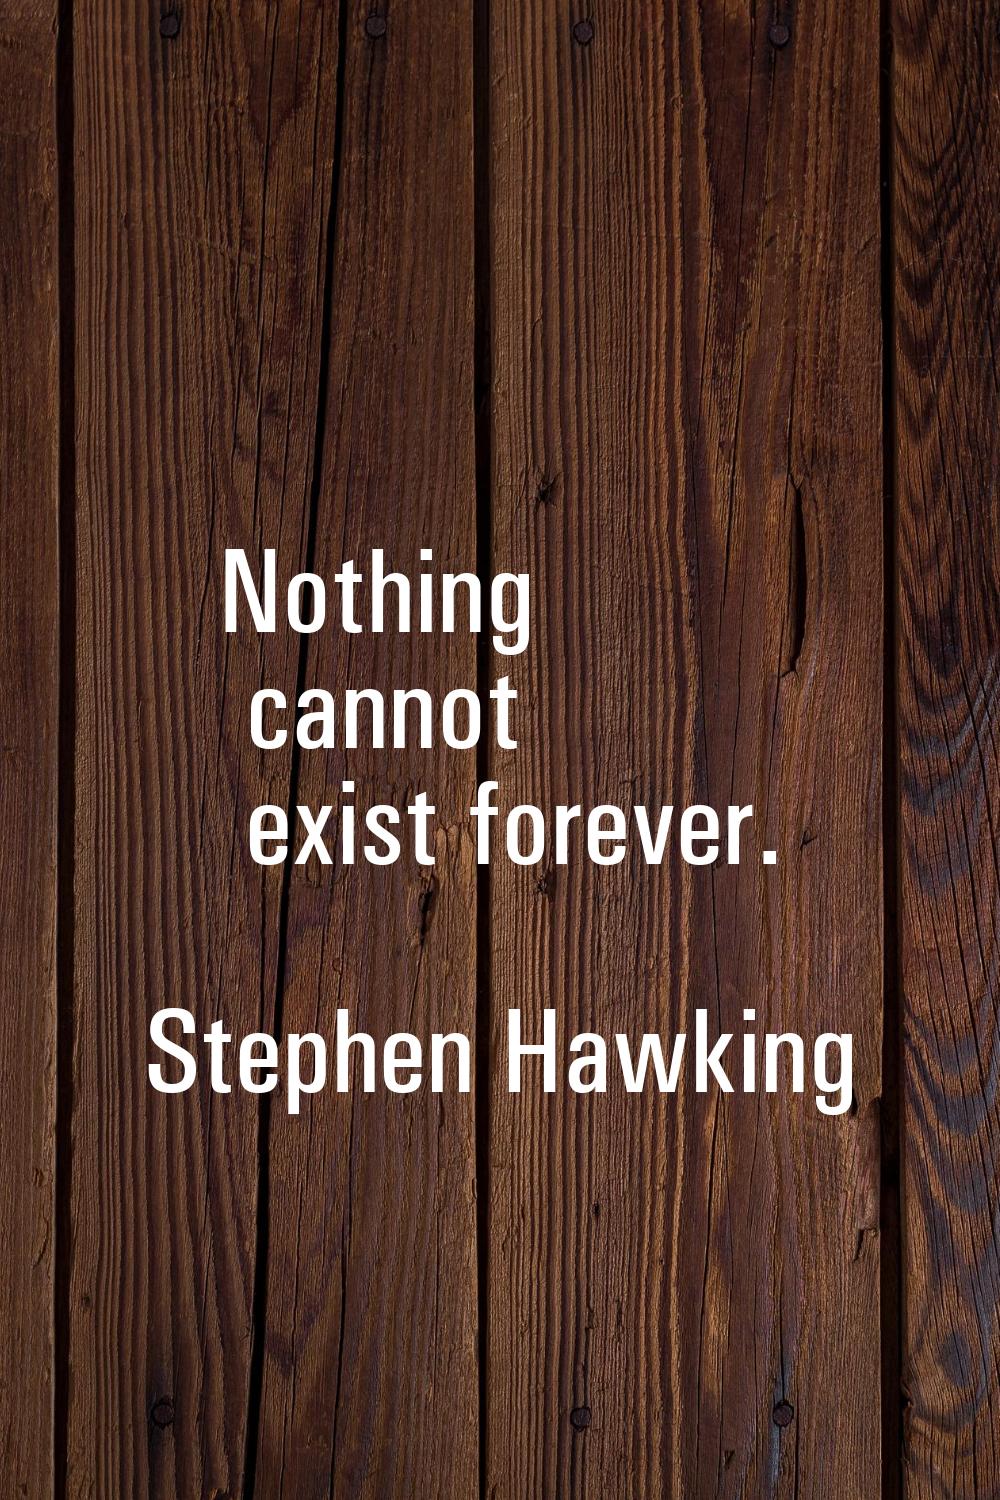 Nothing cannot exist forever.